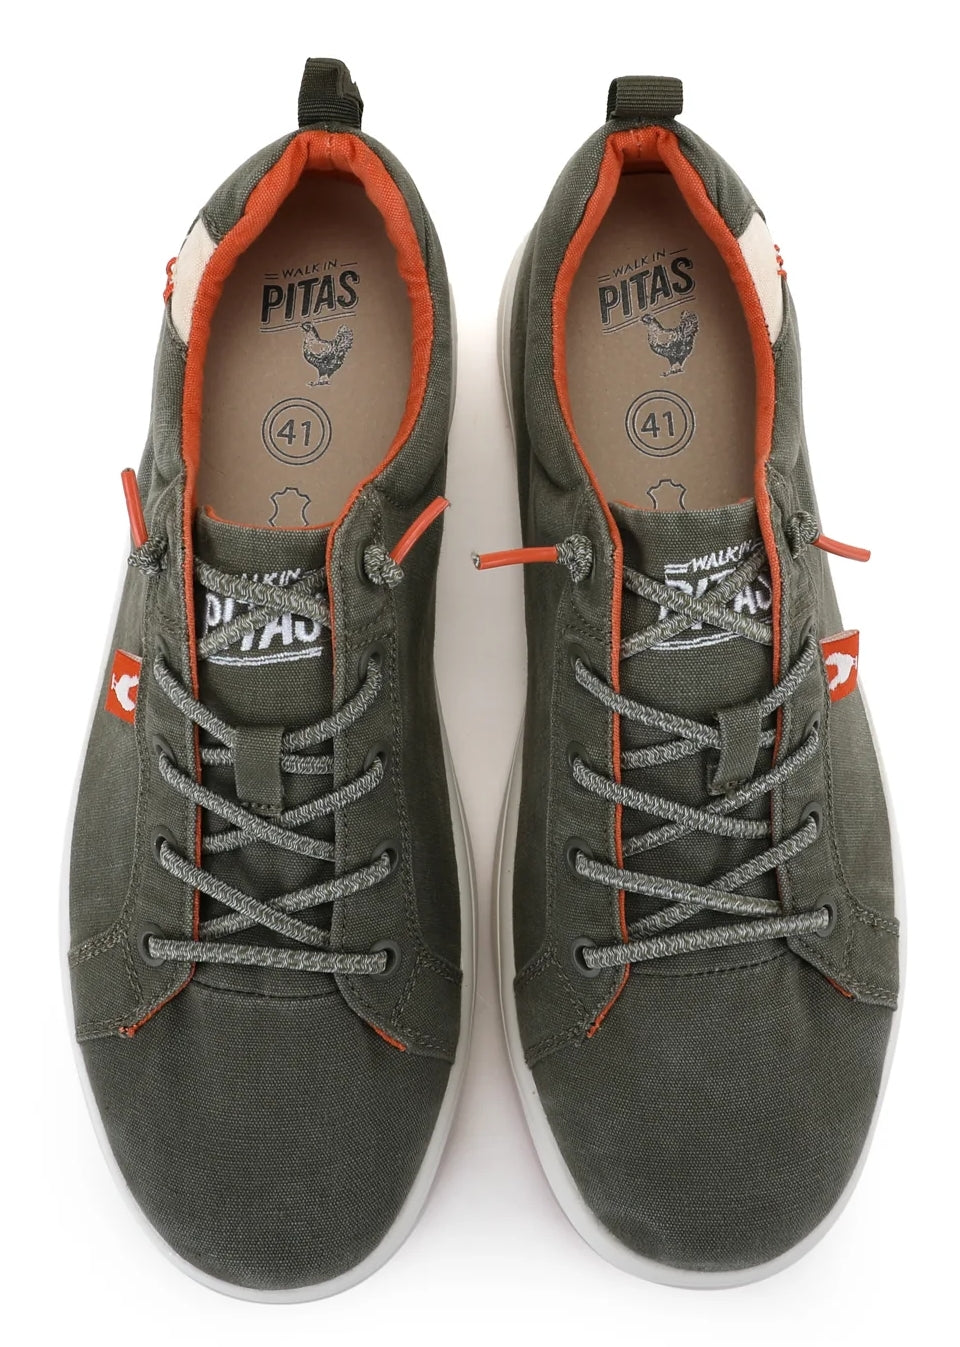 Men's Malibu lace up shoes in Khaki Green from Pitas with leather topped cushioning insoles.